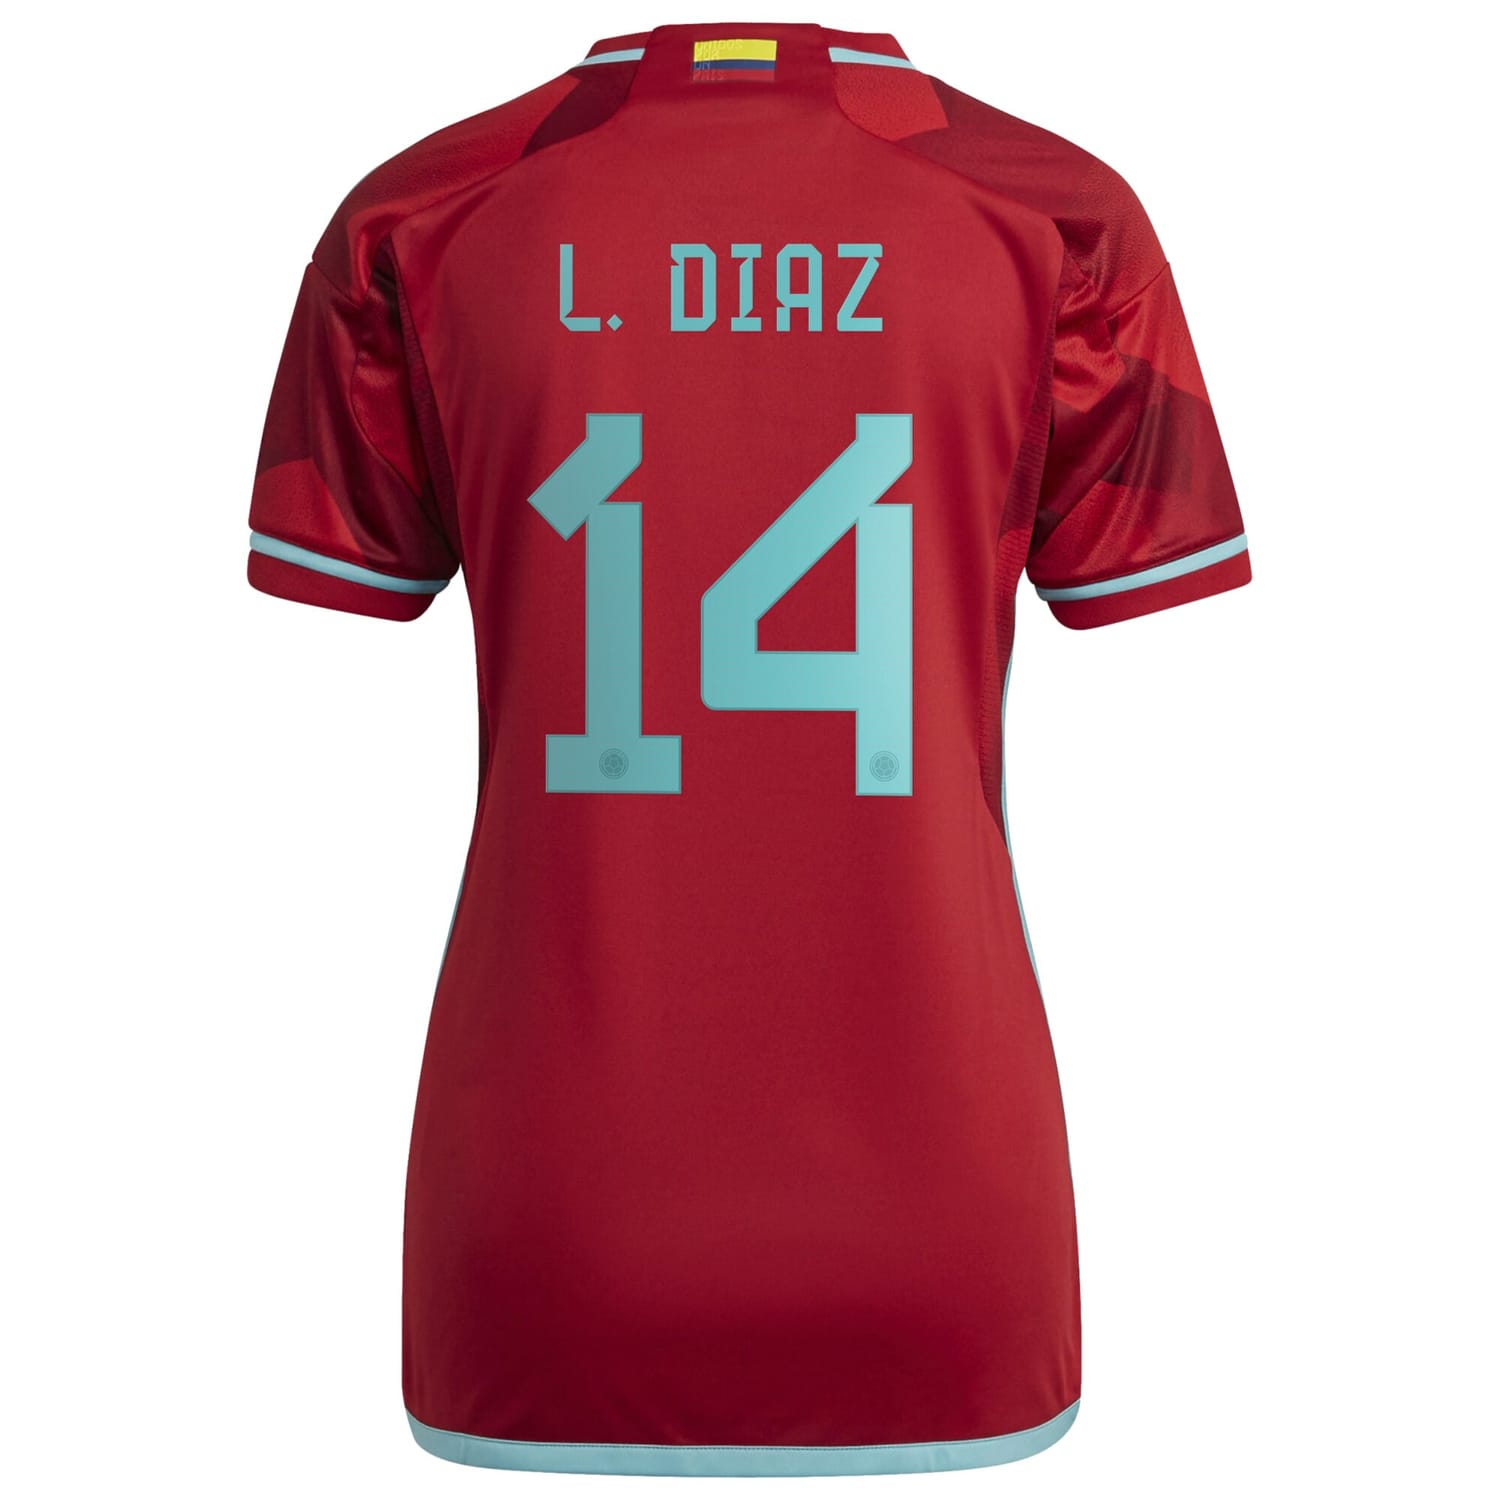 Colombia National Team Away Jersey Shirt Red 2022-23 player Luis Diaz printing for Women